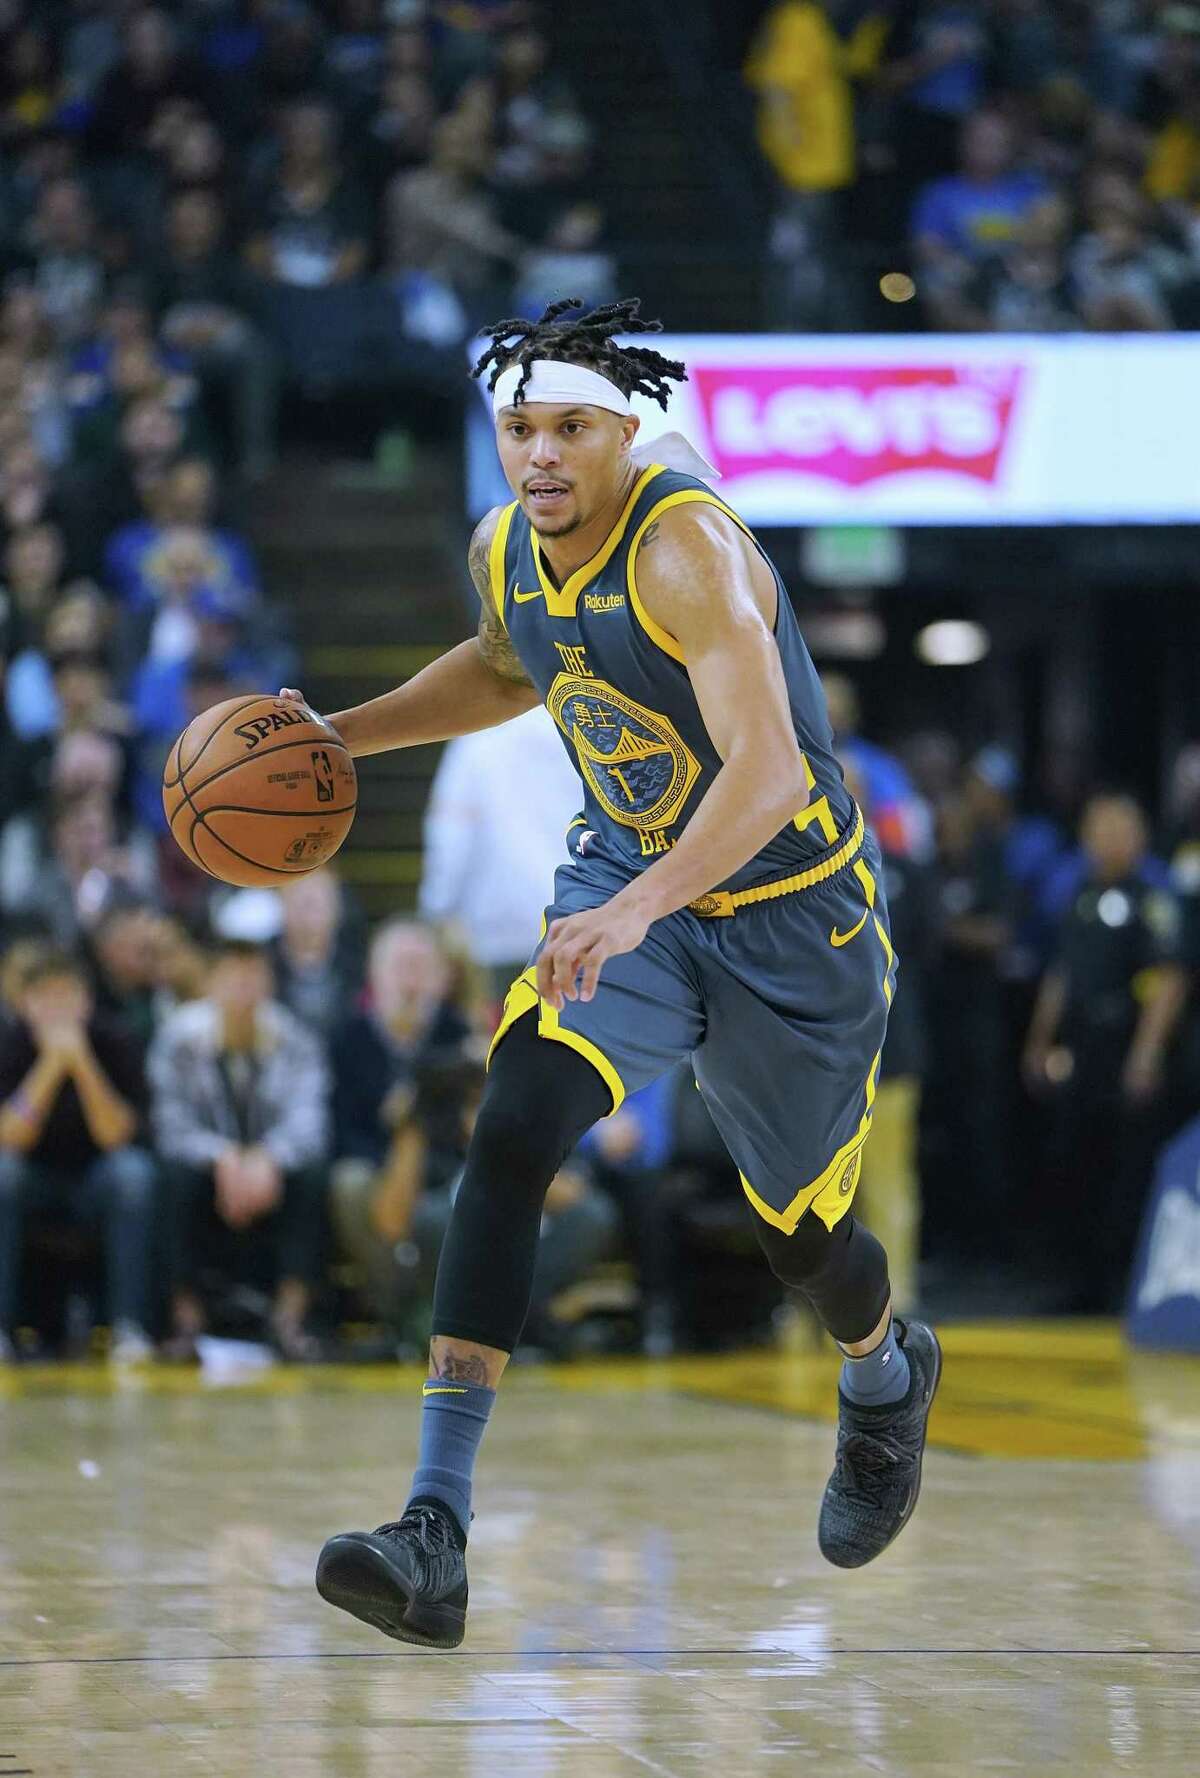 OAKLAND, CA - NOVEMBER 21: Damion Lee #1 of the Golden State Warriors dribbles the ball against the Oklahoma City Thunder during an NBA basketball game at ORACLE Arena on November 21, 2018 in Oakland, California. NOTE TO USER: User expressly acknowledges and agrees that, by downloading and or using this photograph, User is consenting to the terms and conditions of the Getty Images License Agreement. (Photo by Thearon W. Henderson/Getty Images)